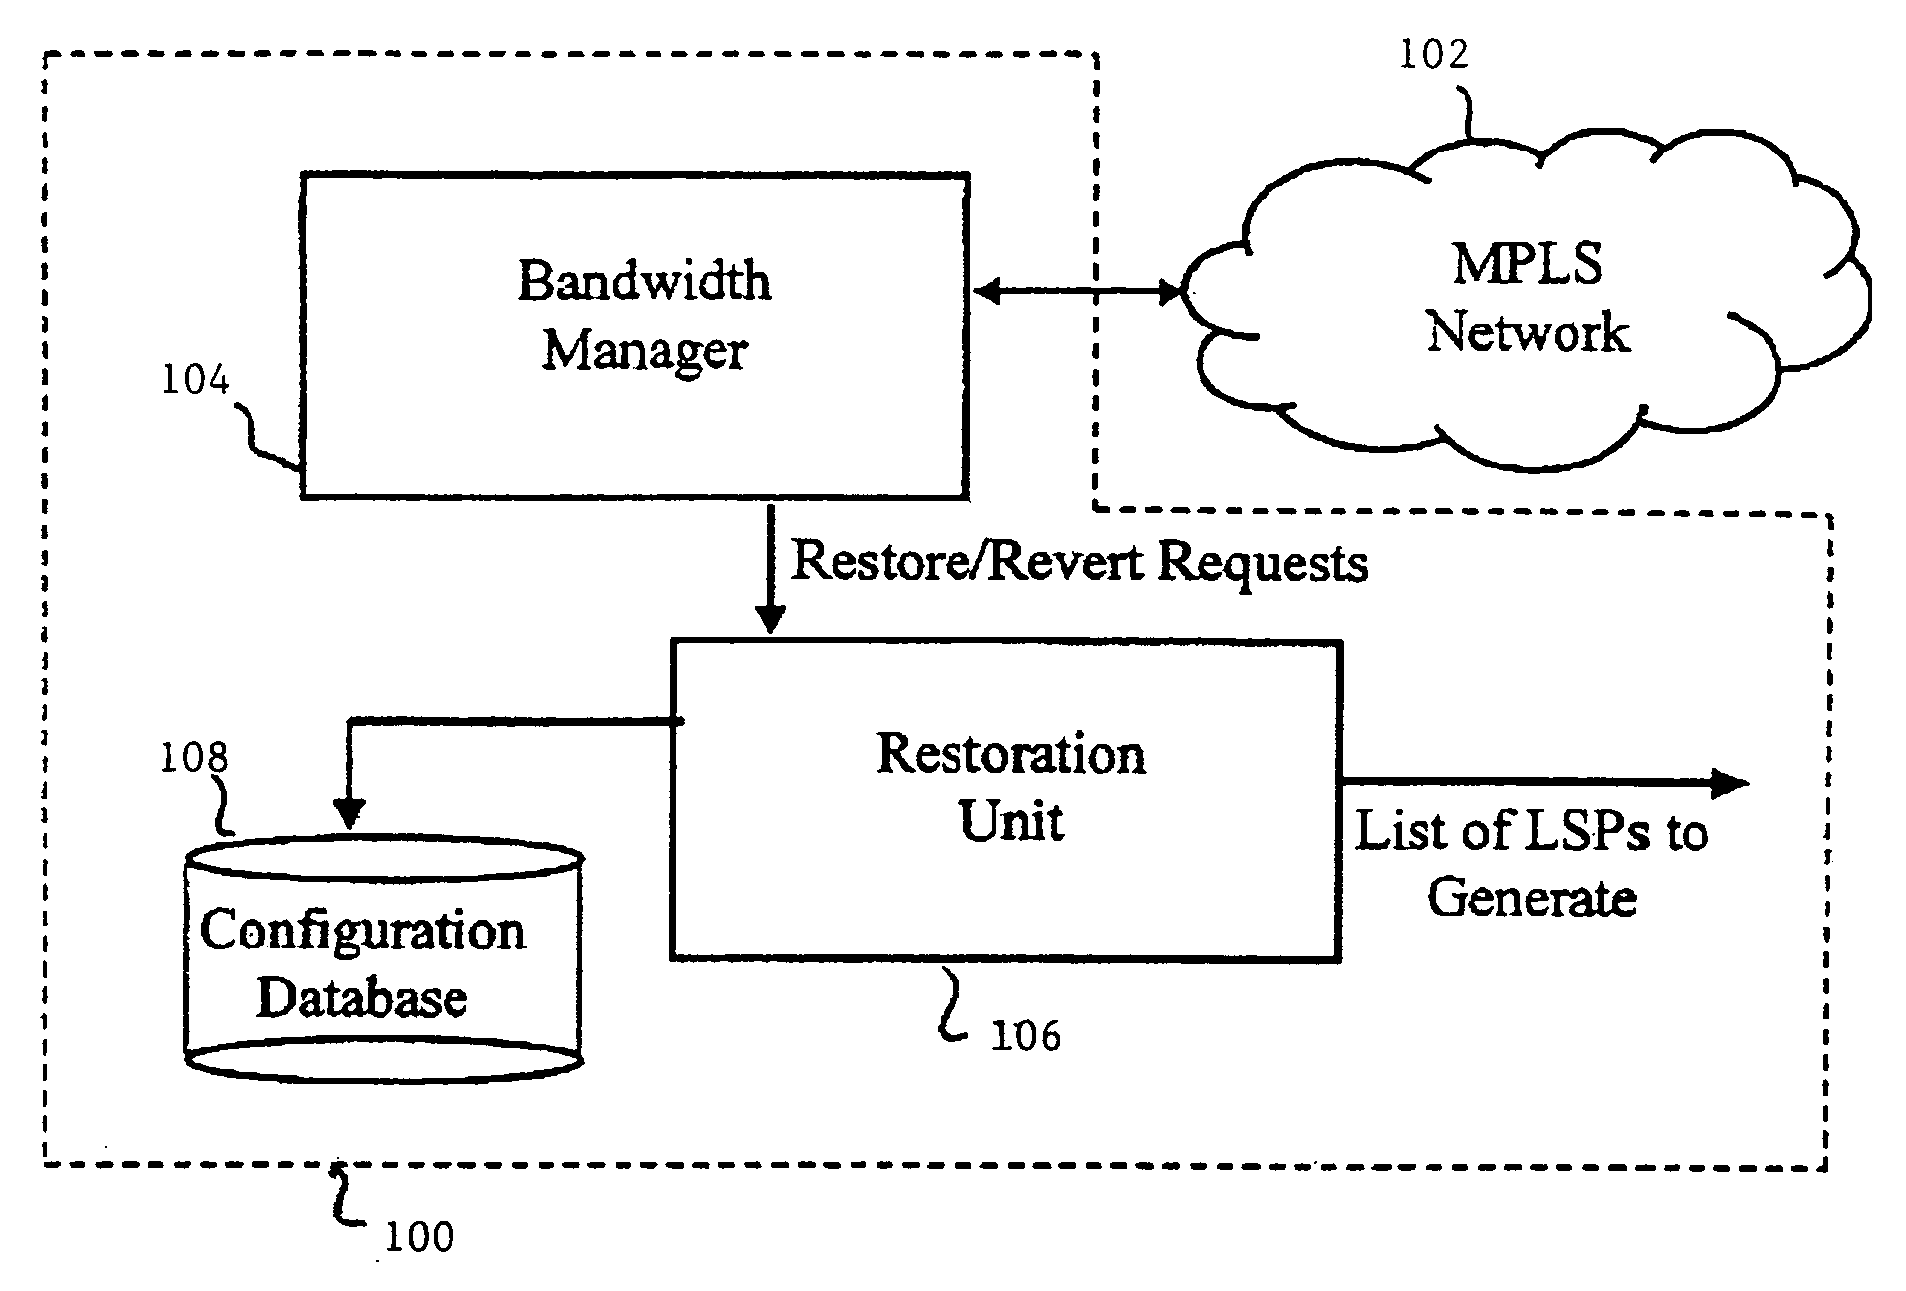 Dynamic traffic rearrangement and restoration for MPLS networks with differentiated services capabilities